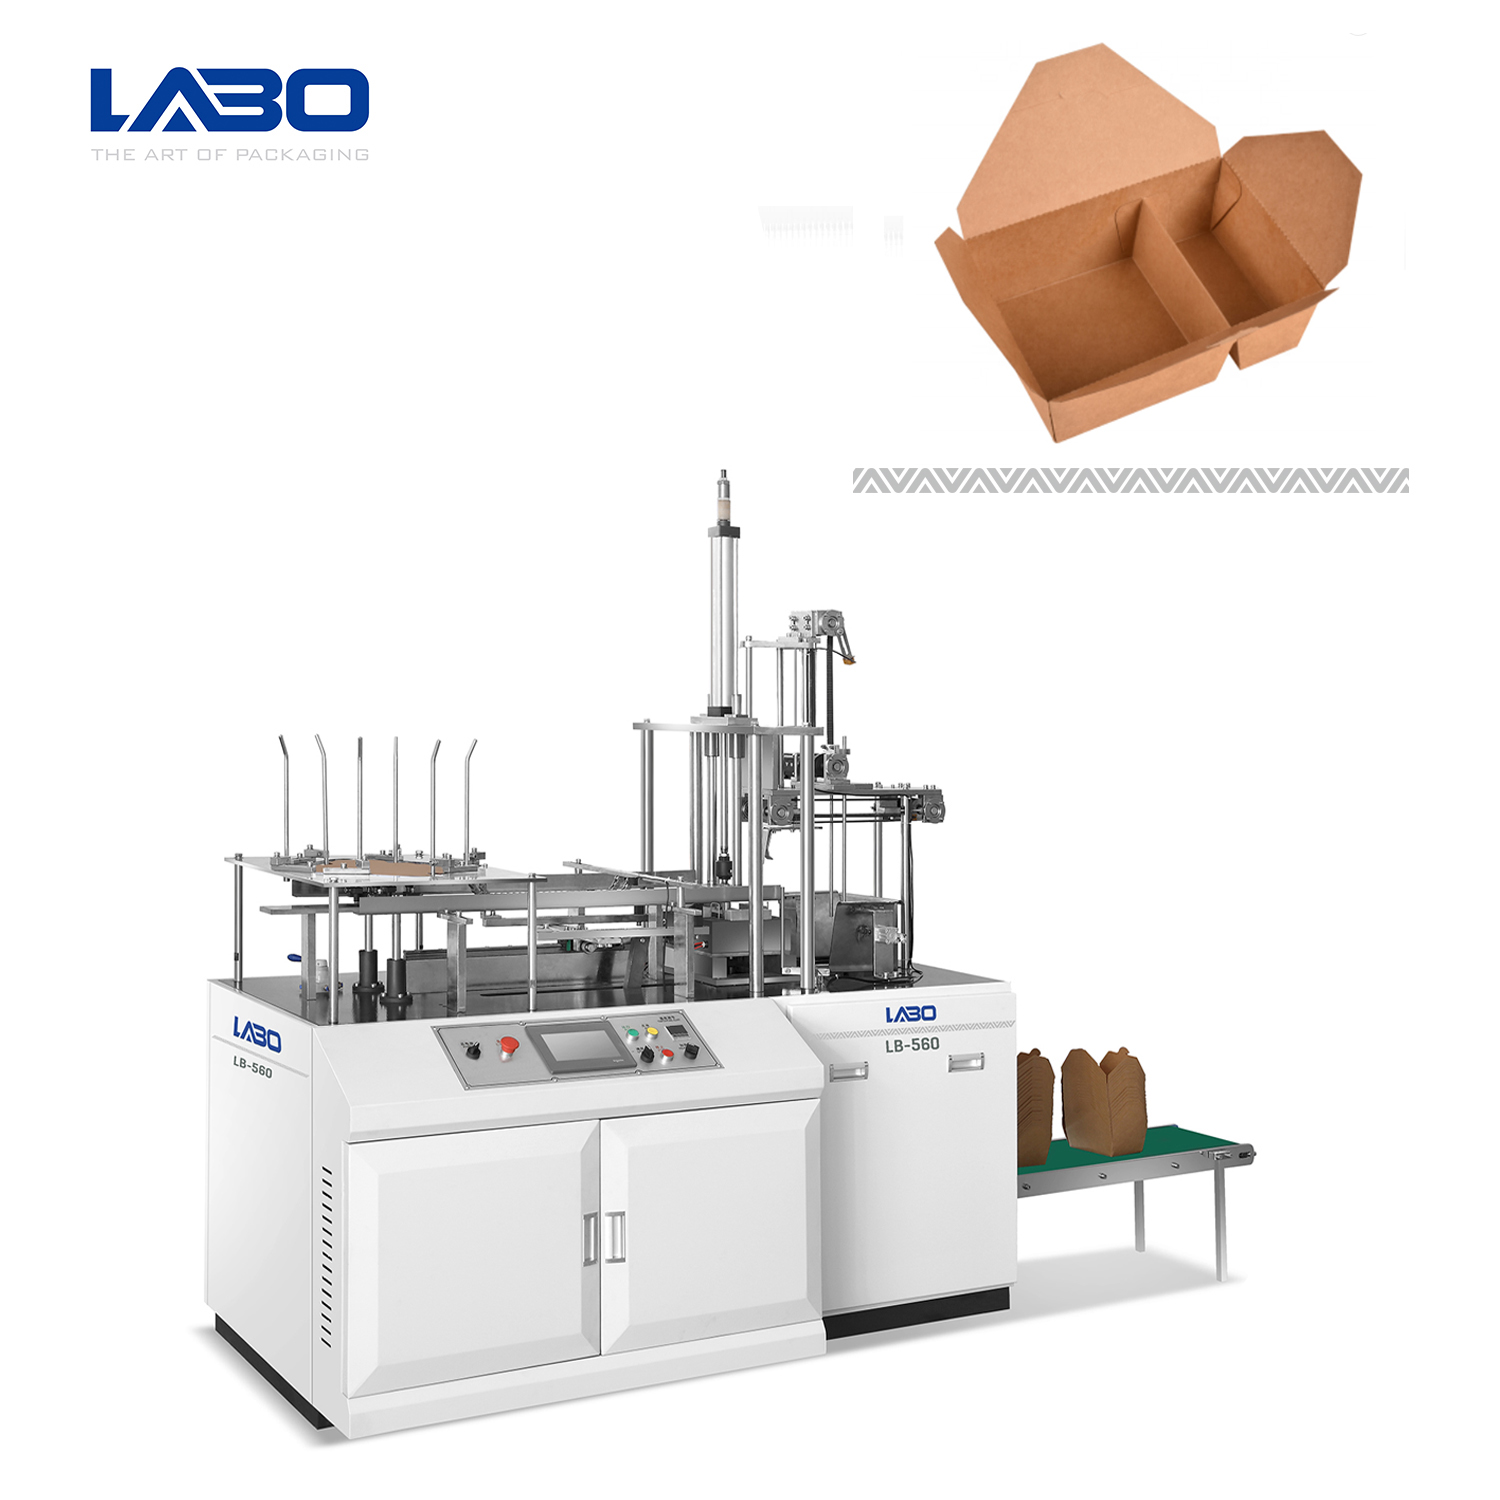 Automatic Paper Plate Forming Machine-MIC 3.jpg